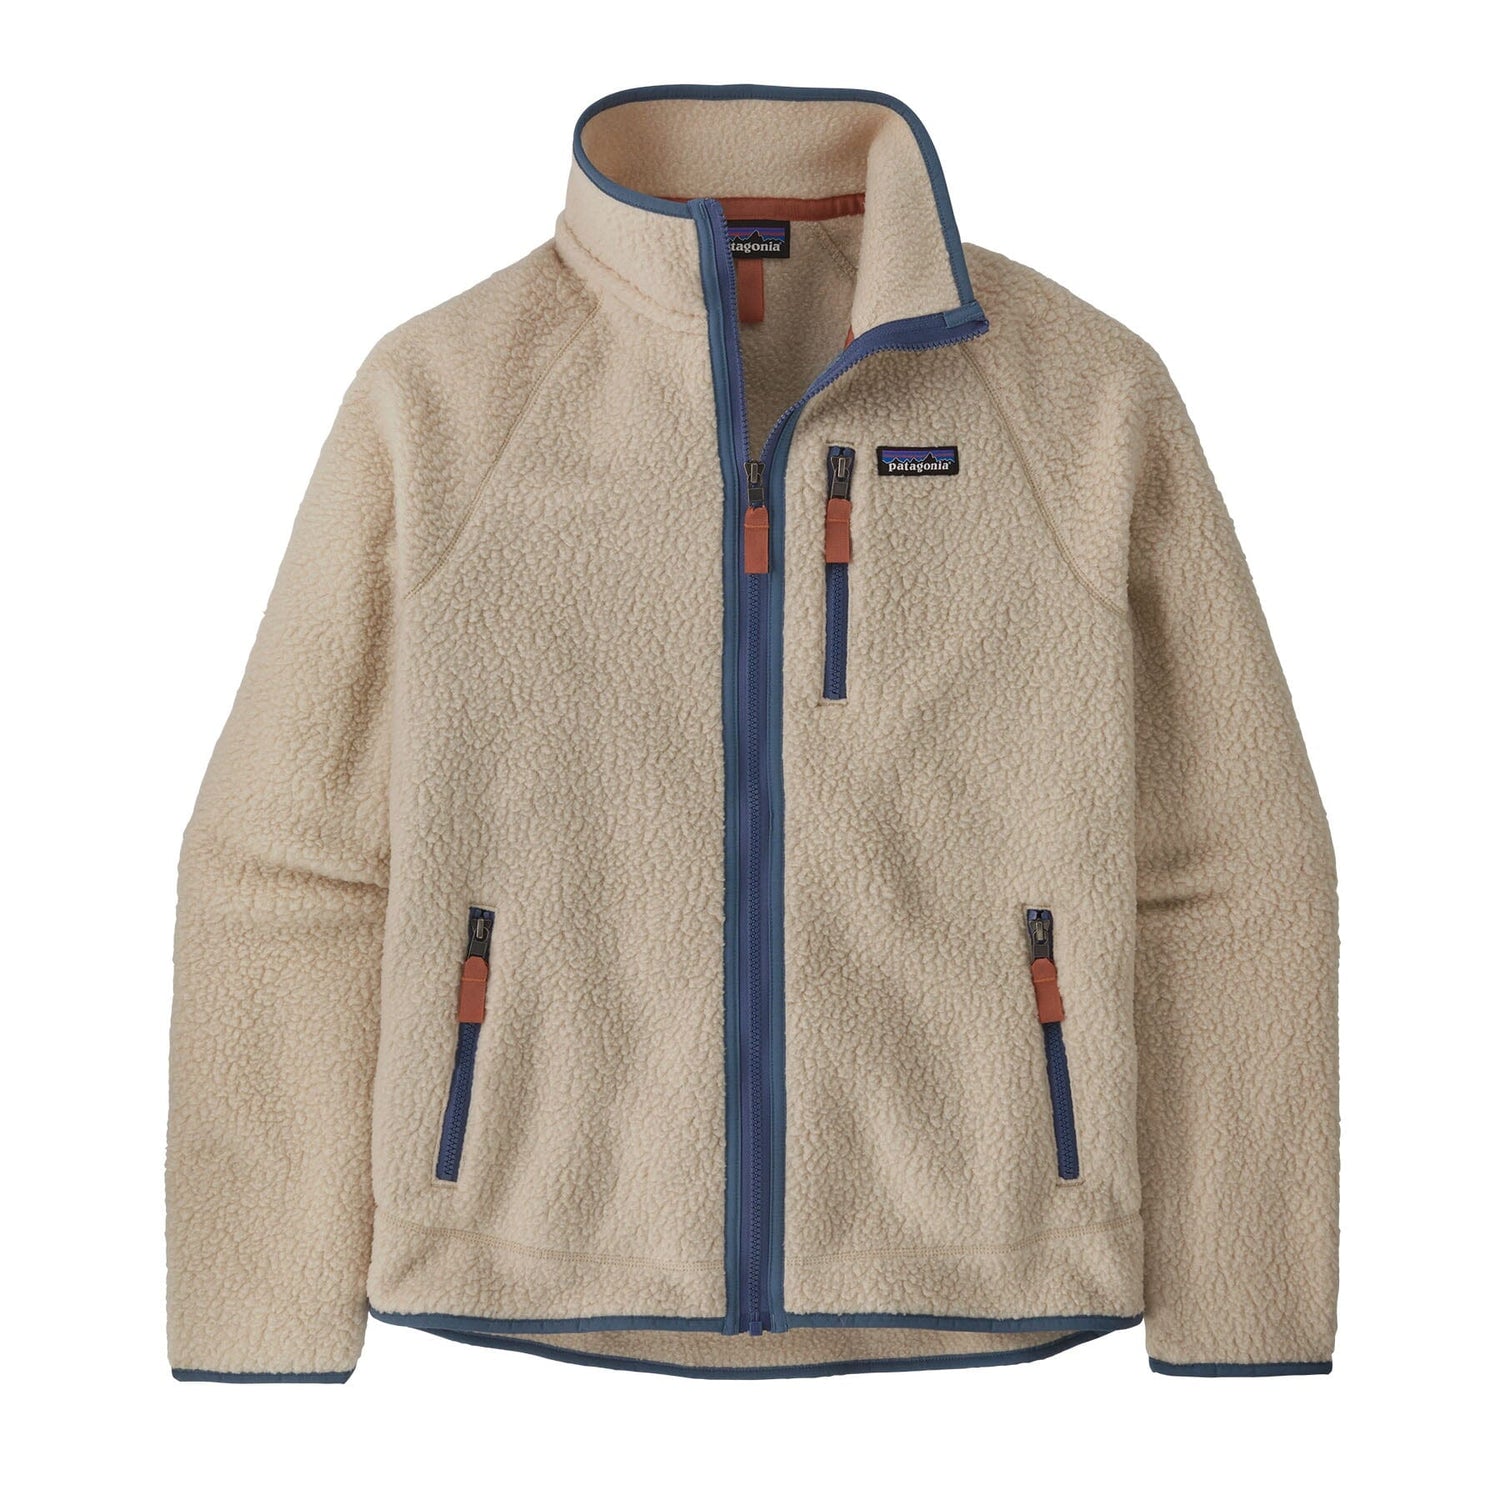 Patagonia M's Retro Pile Jacket - 100 % Recycled Polyester Dark Natural w Utility Blue Jacket